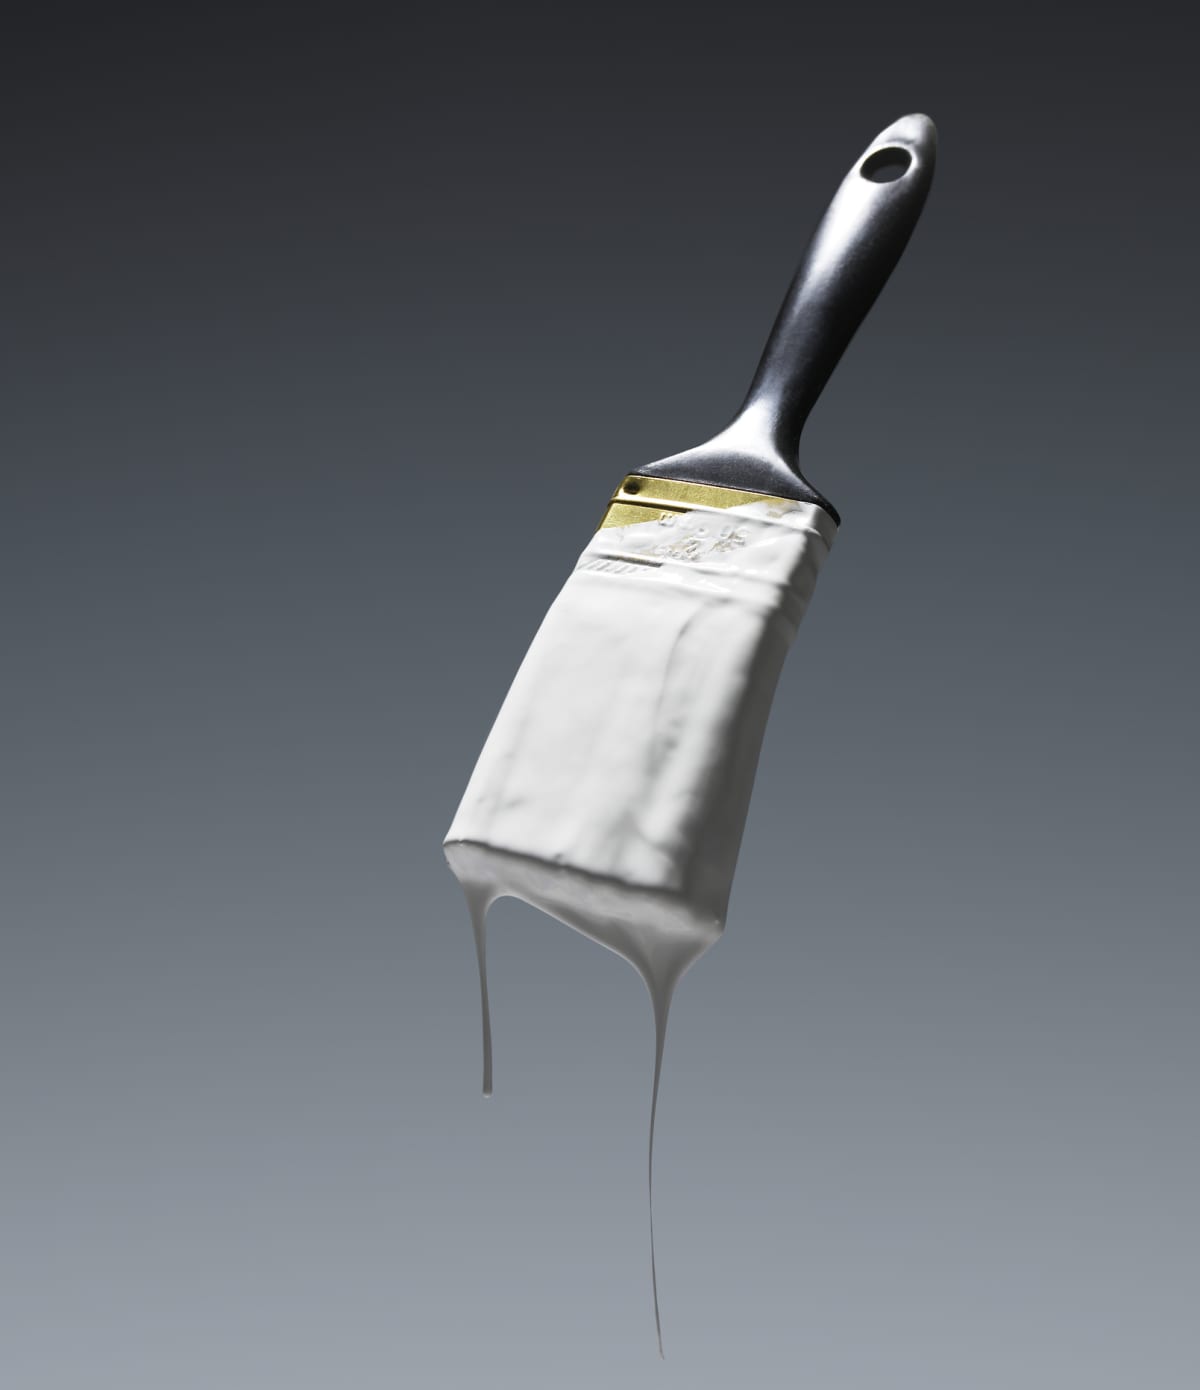 A paintbrush dripping white paint